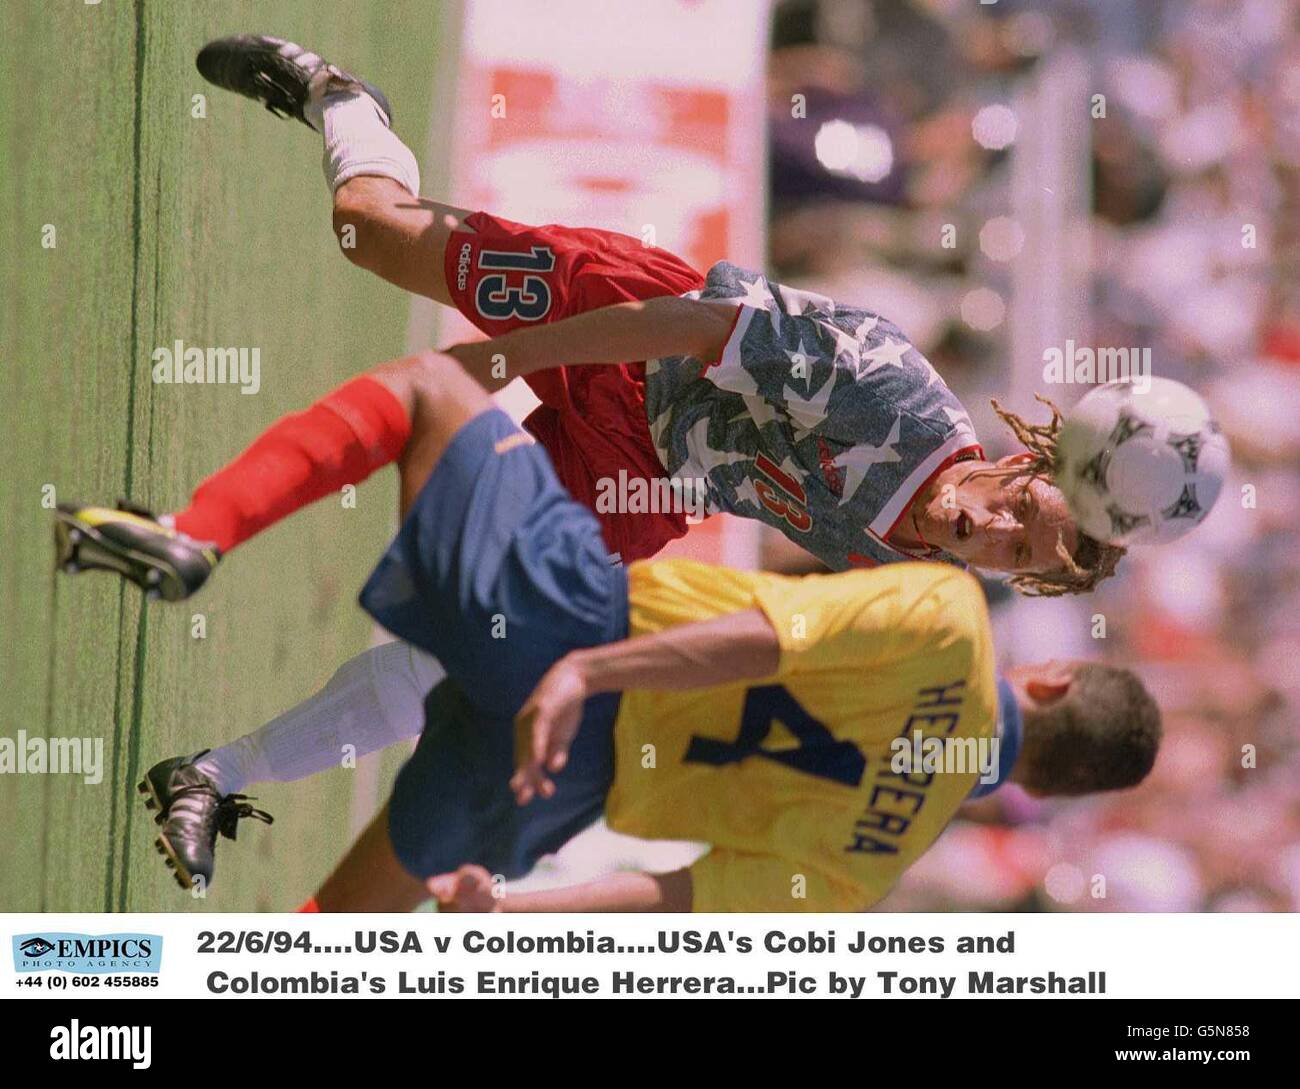 Soccer - World Cup USA 94 - Group A - USA v Colombia. USA's Cobi Jones and Colombia's Luis Enrique Herrera Stock Photo